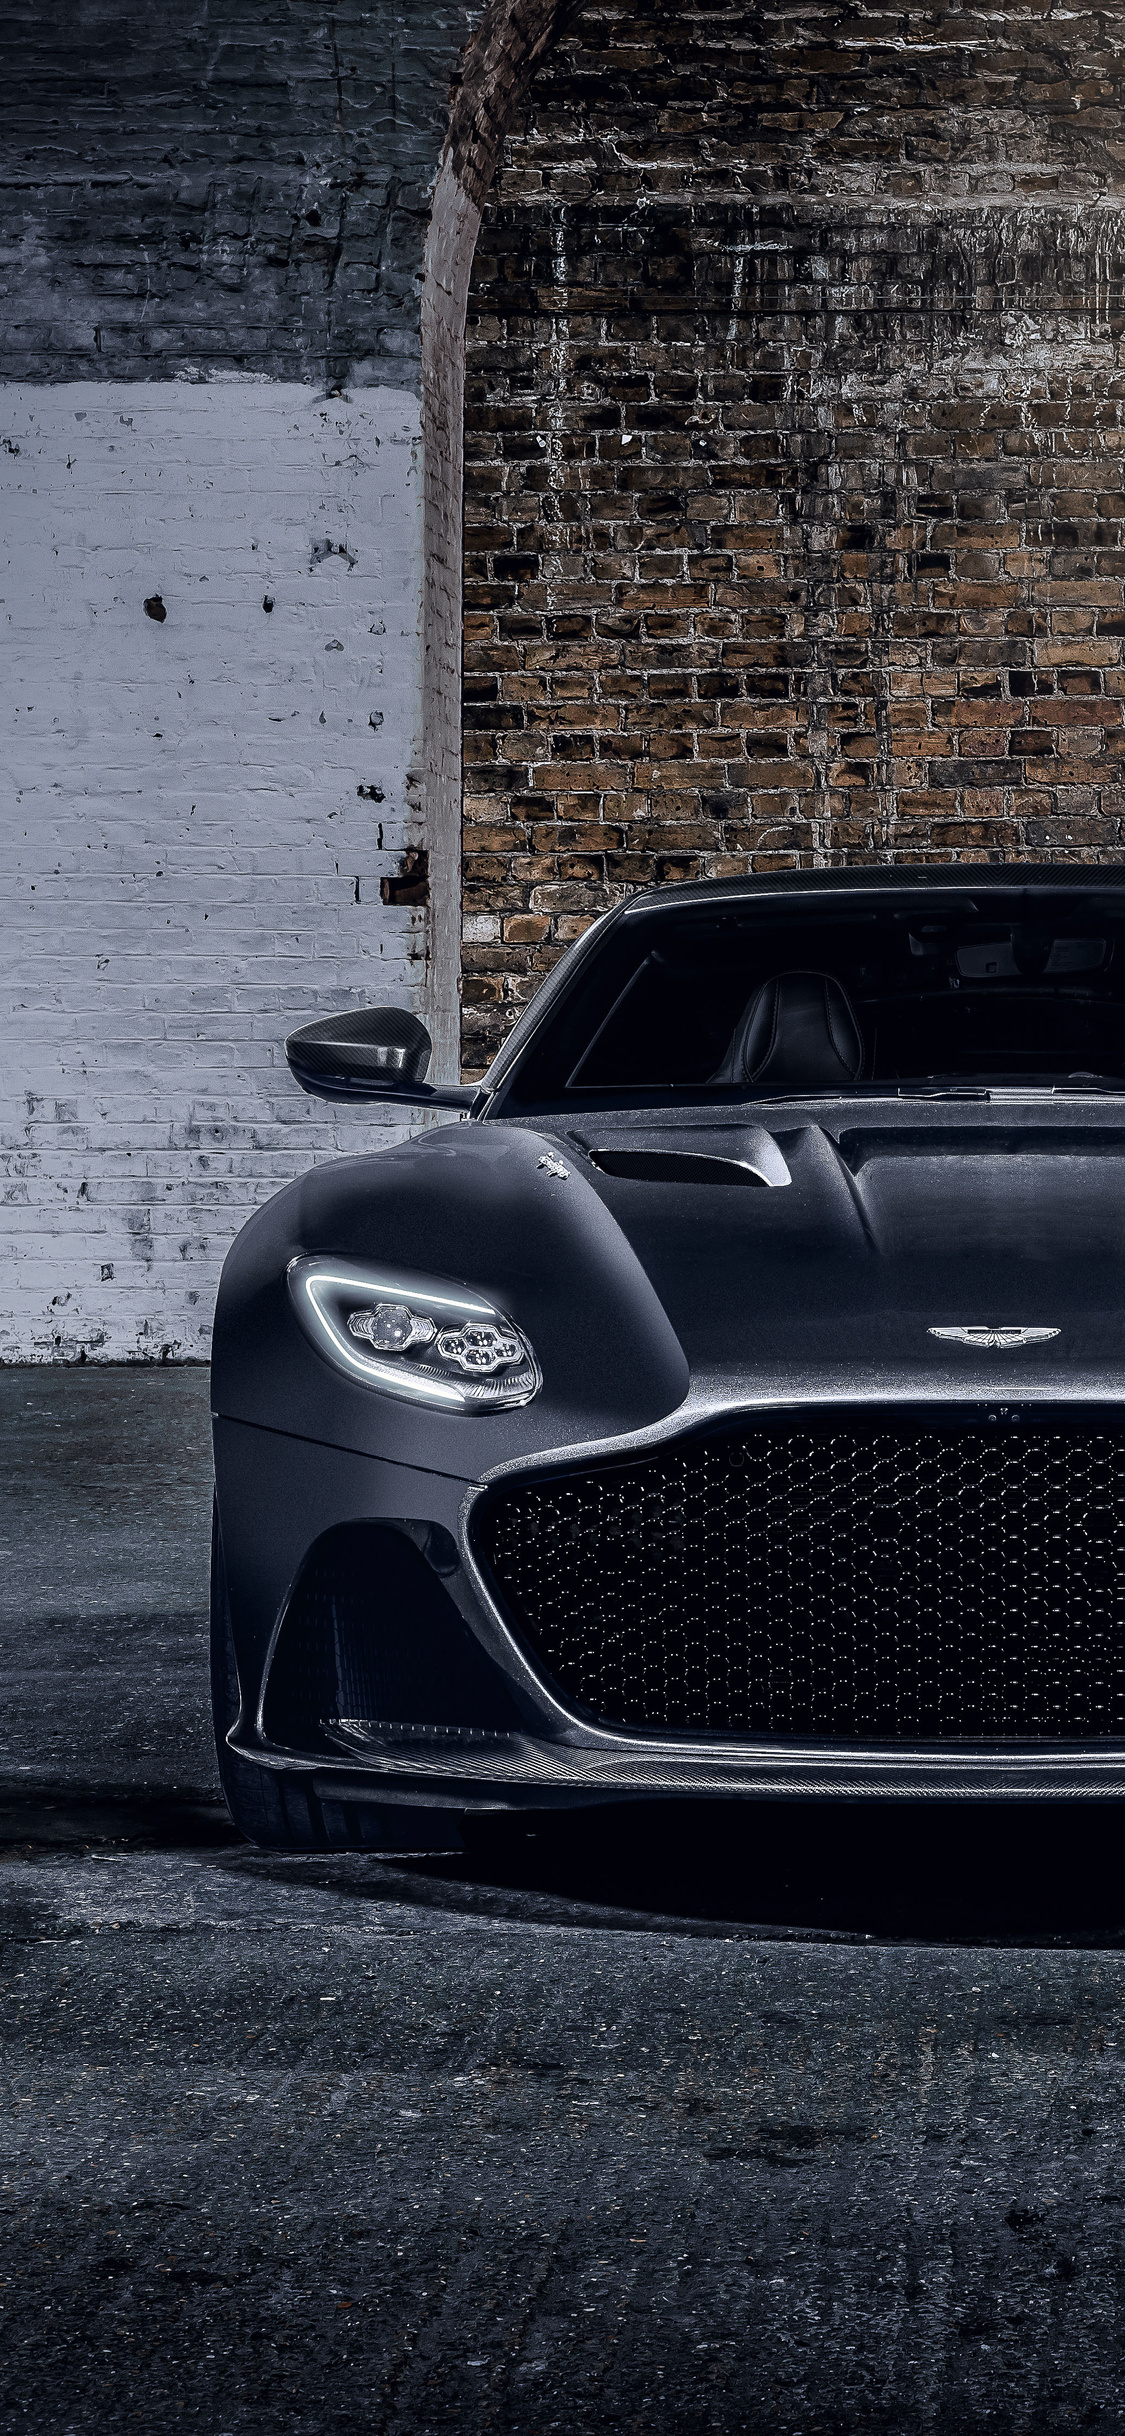 Aston Martin Dbs Superleggera 007 Edition 5k iPhone XS, iPhone iPhone X HD 4k Wallpaper, Image, Background, Photo and Picture